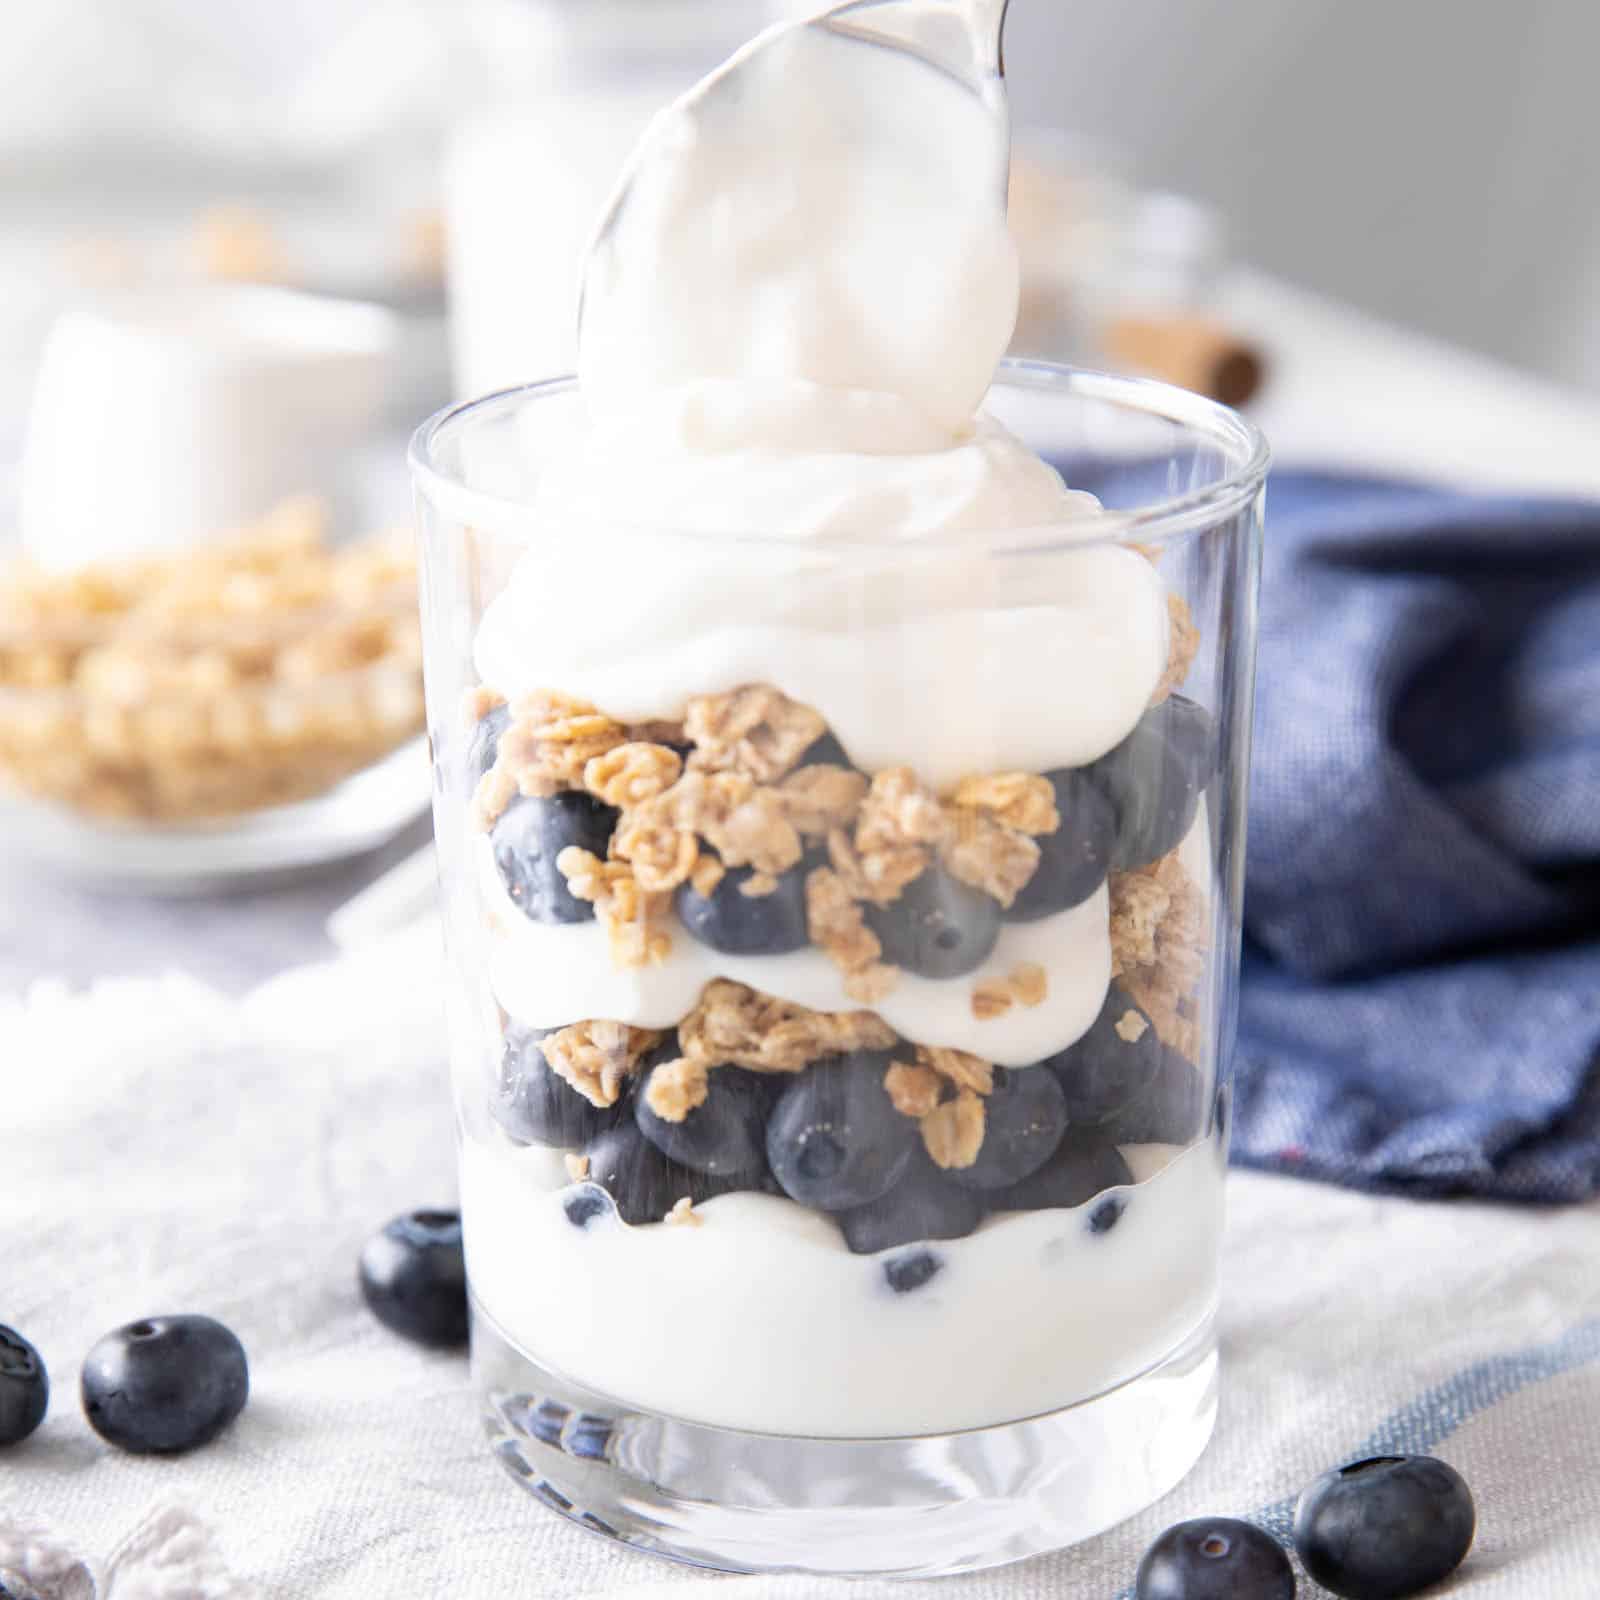 Creating the final layer of yogurt in the blueberry yogurt parfait in square image